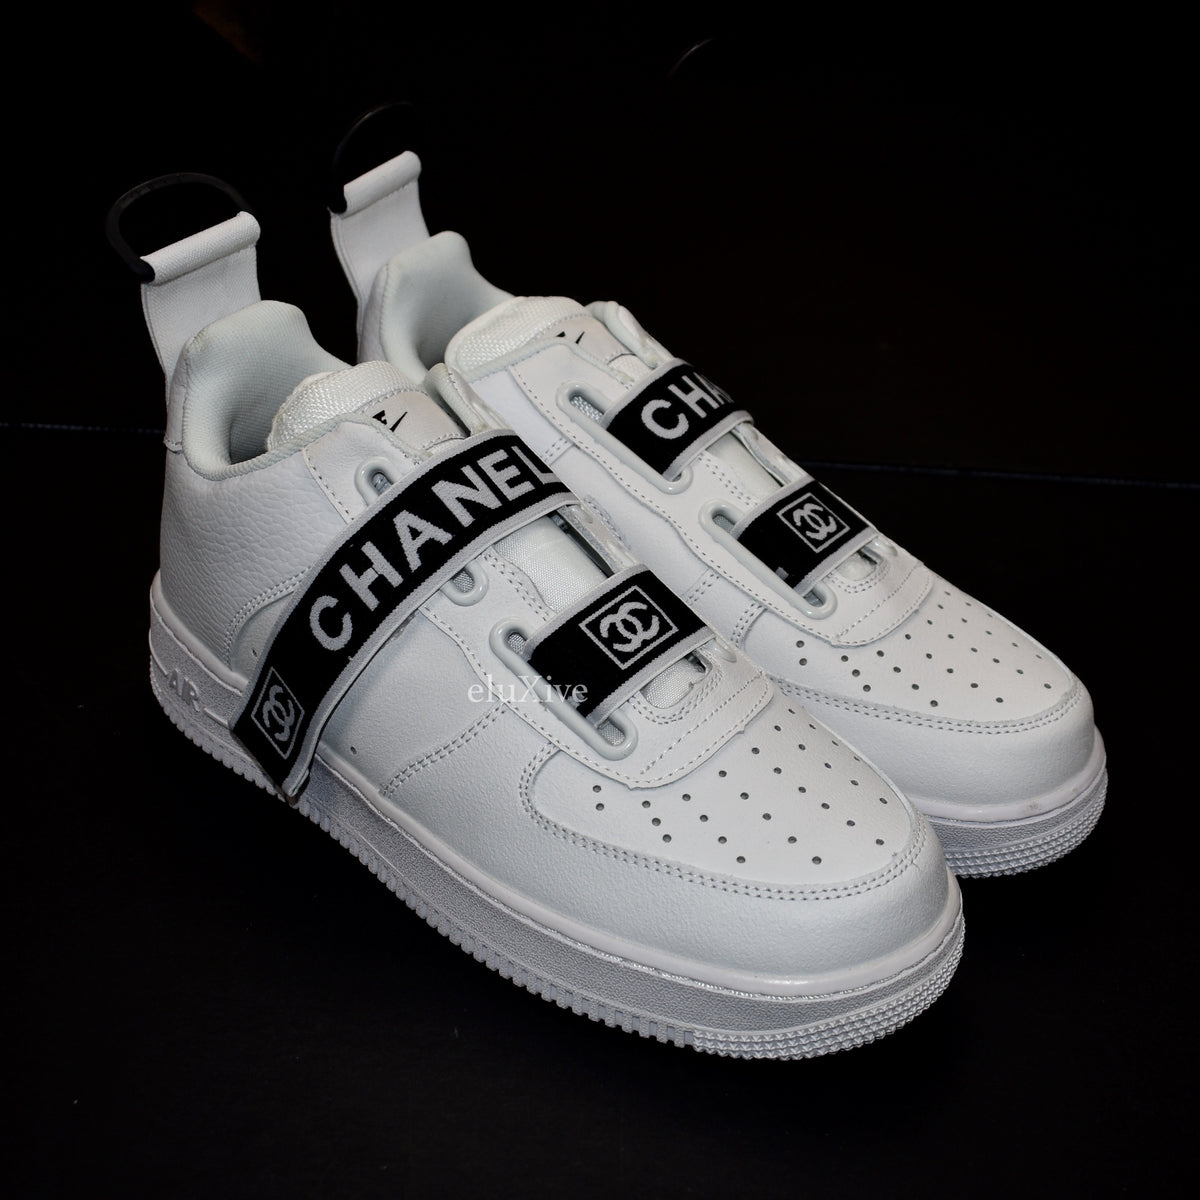 chanel nike air force 1 shoes